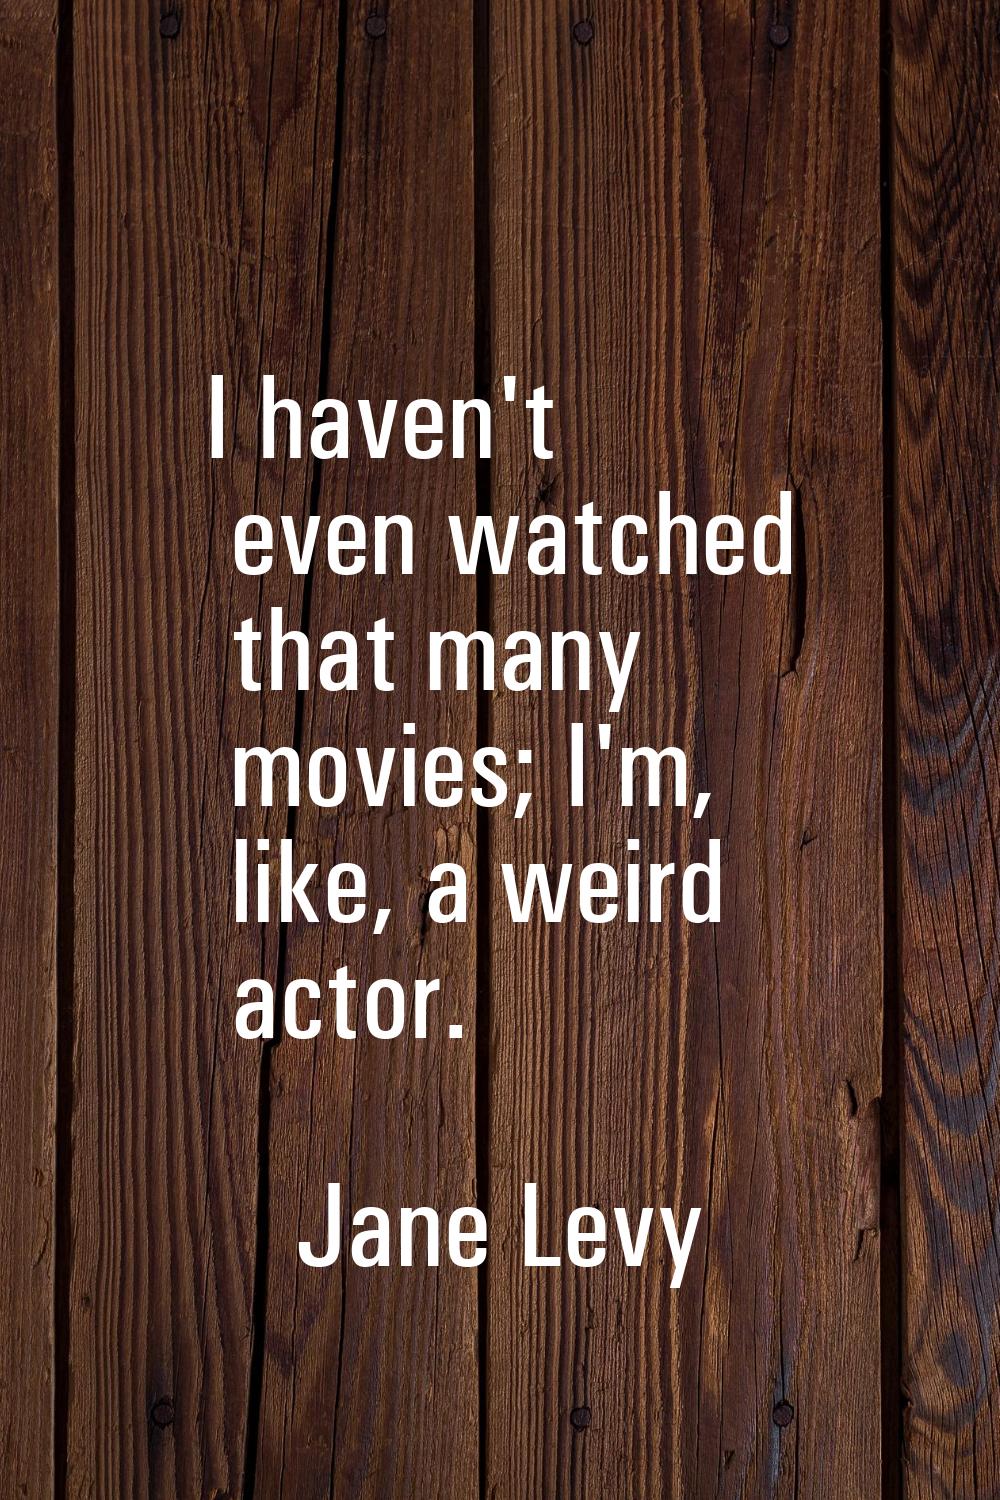 I haven't even watched that many movies; I'm, like, a weird actor.